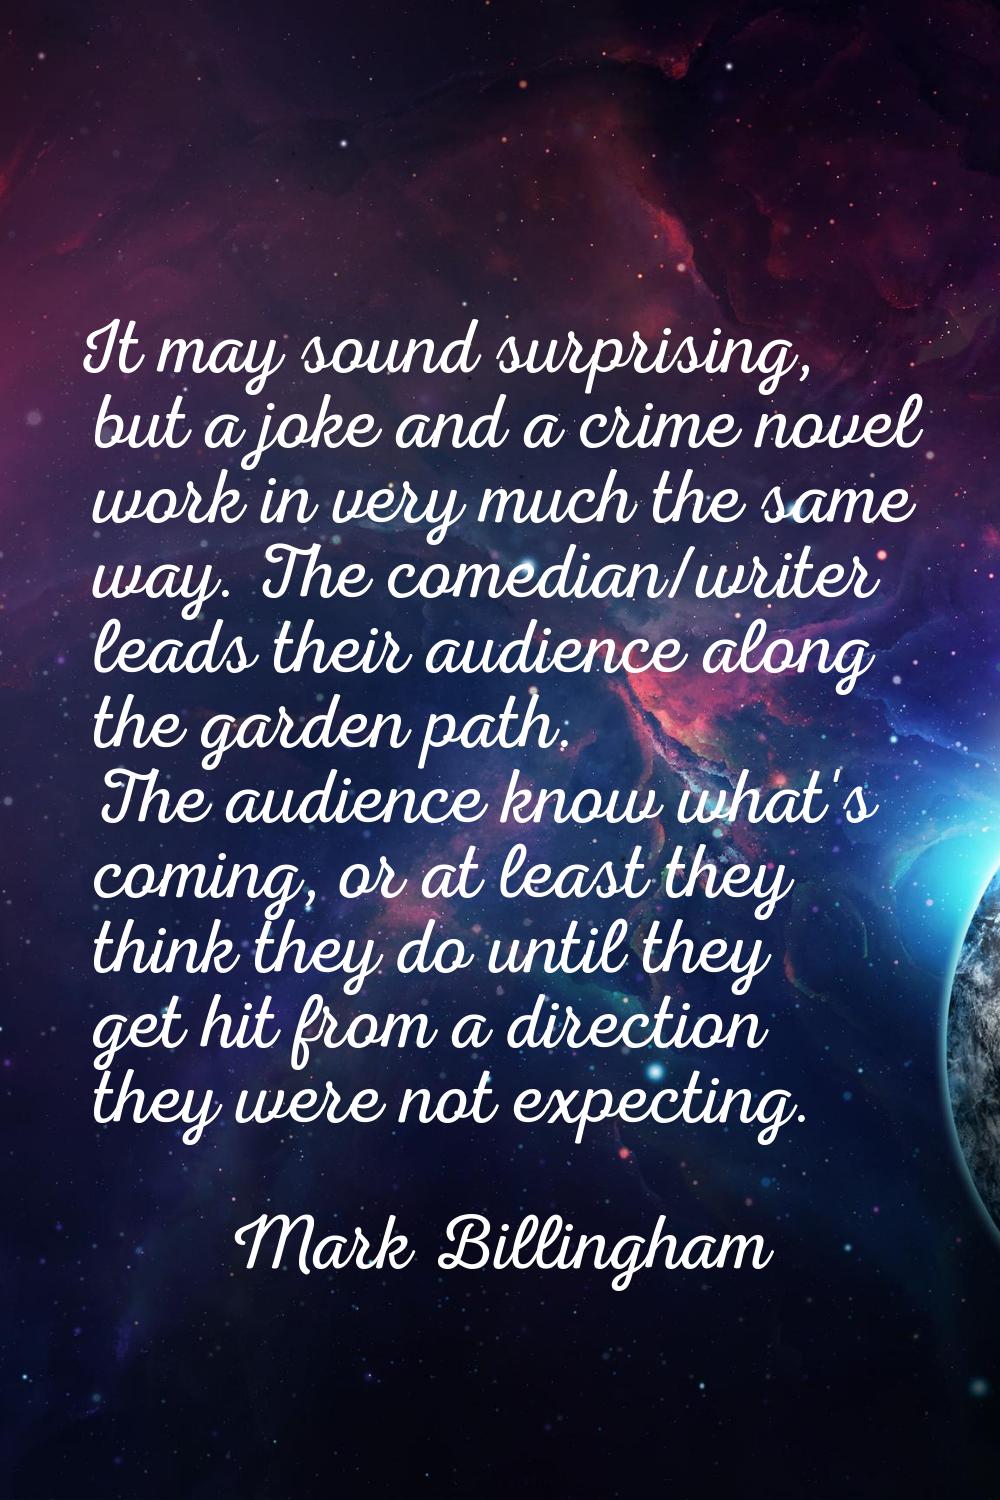 It may sound surprising, but a joke and a crime novel work in very much the same way. The comedian/